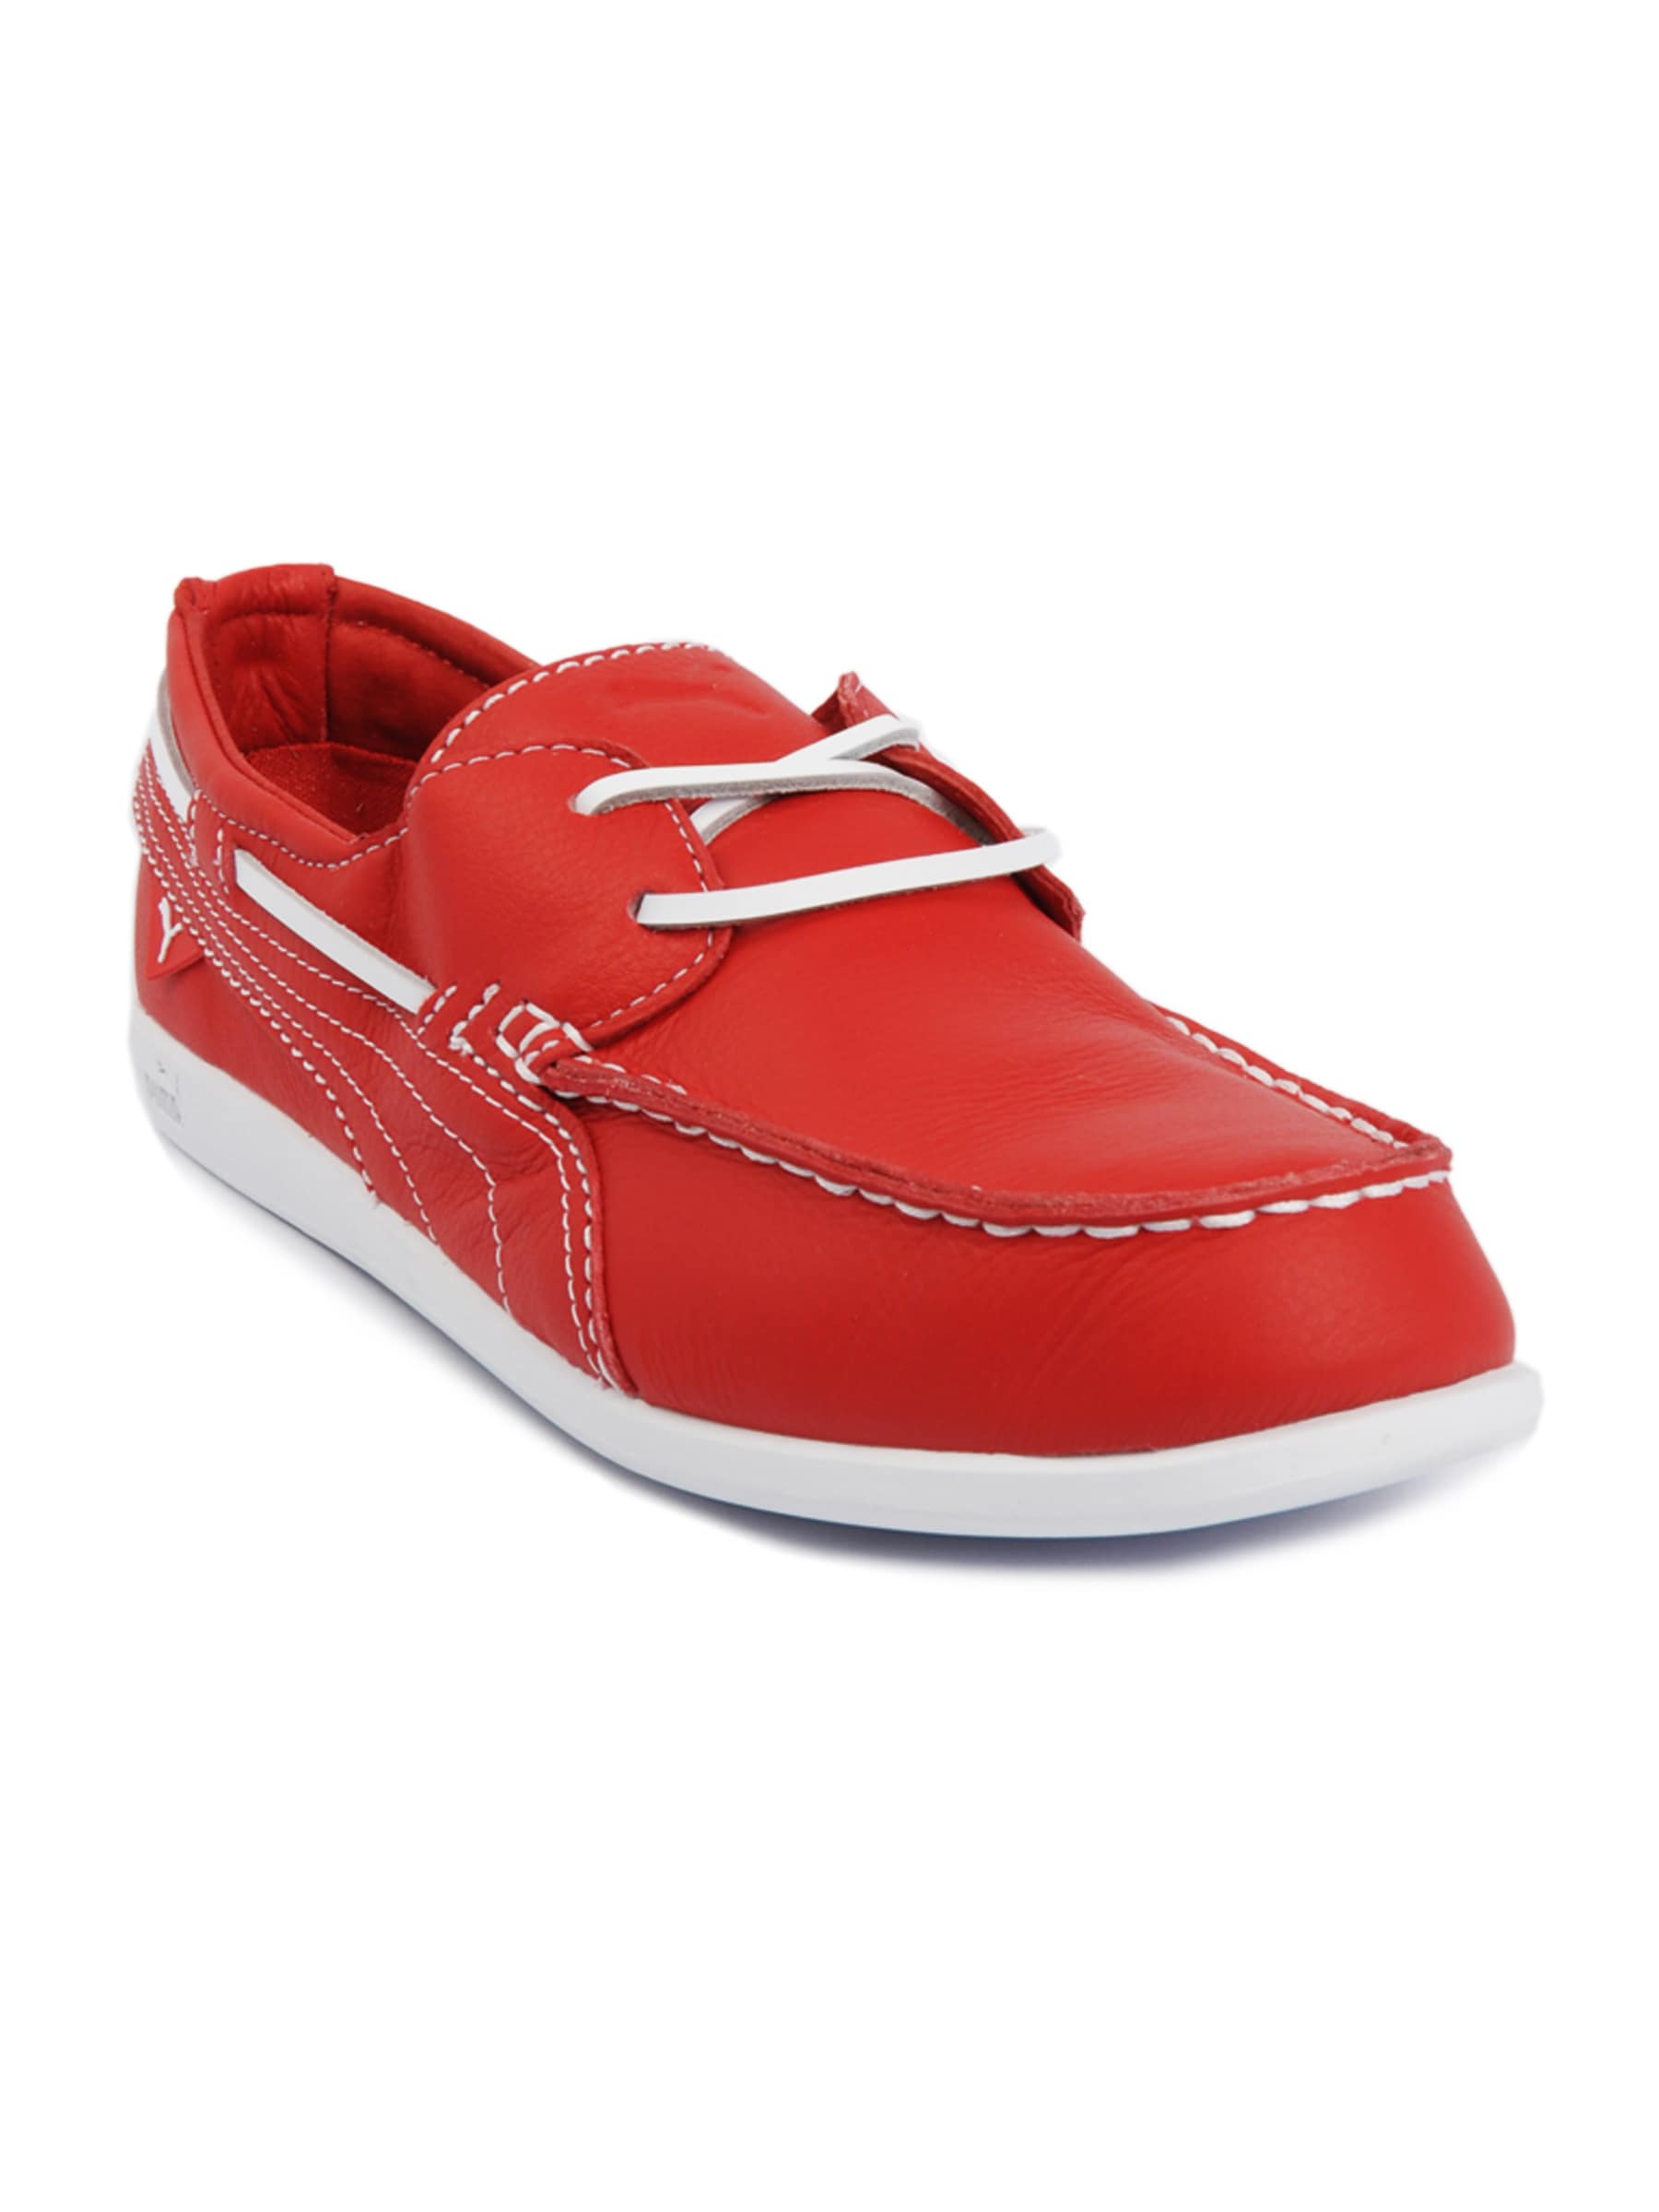 Puma Men Yacht L Red Casual Shoes